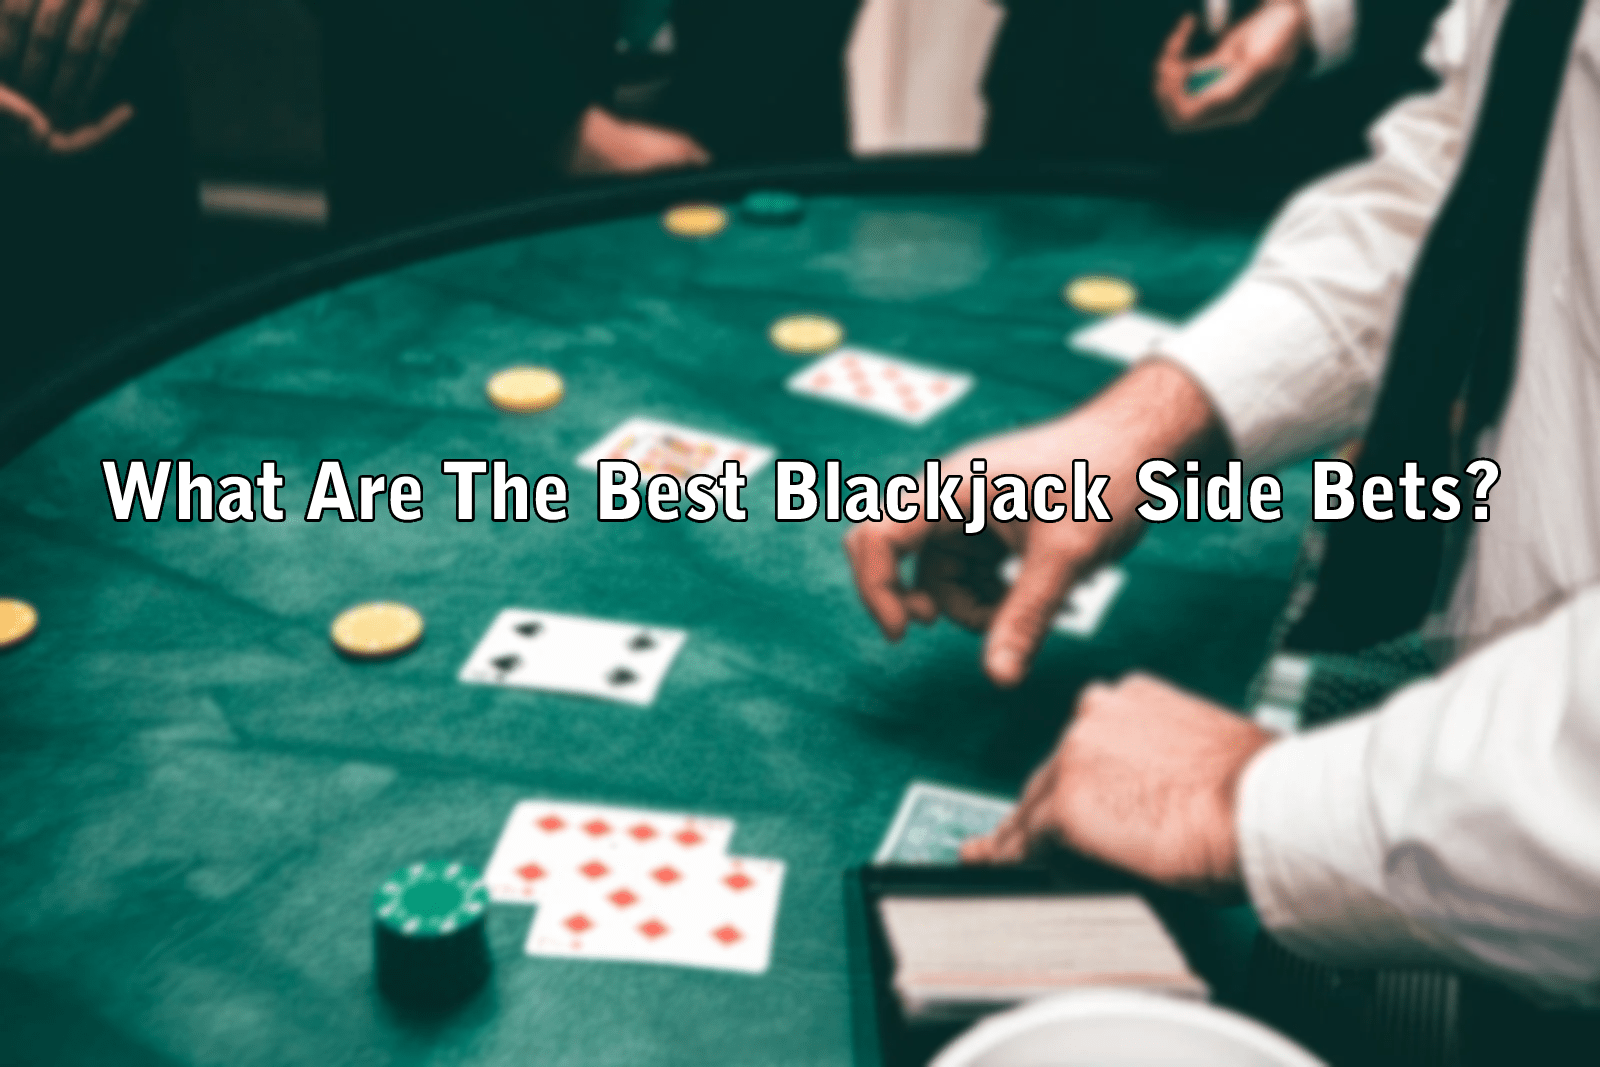 What Are The Best Blackjack Side Bets?